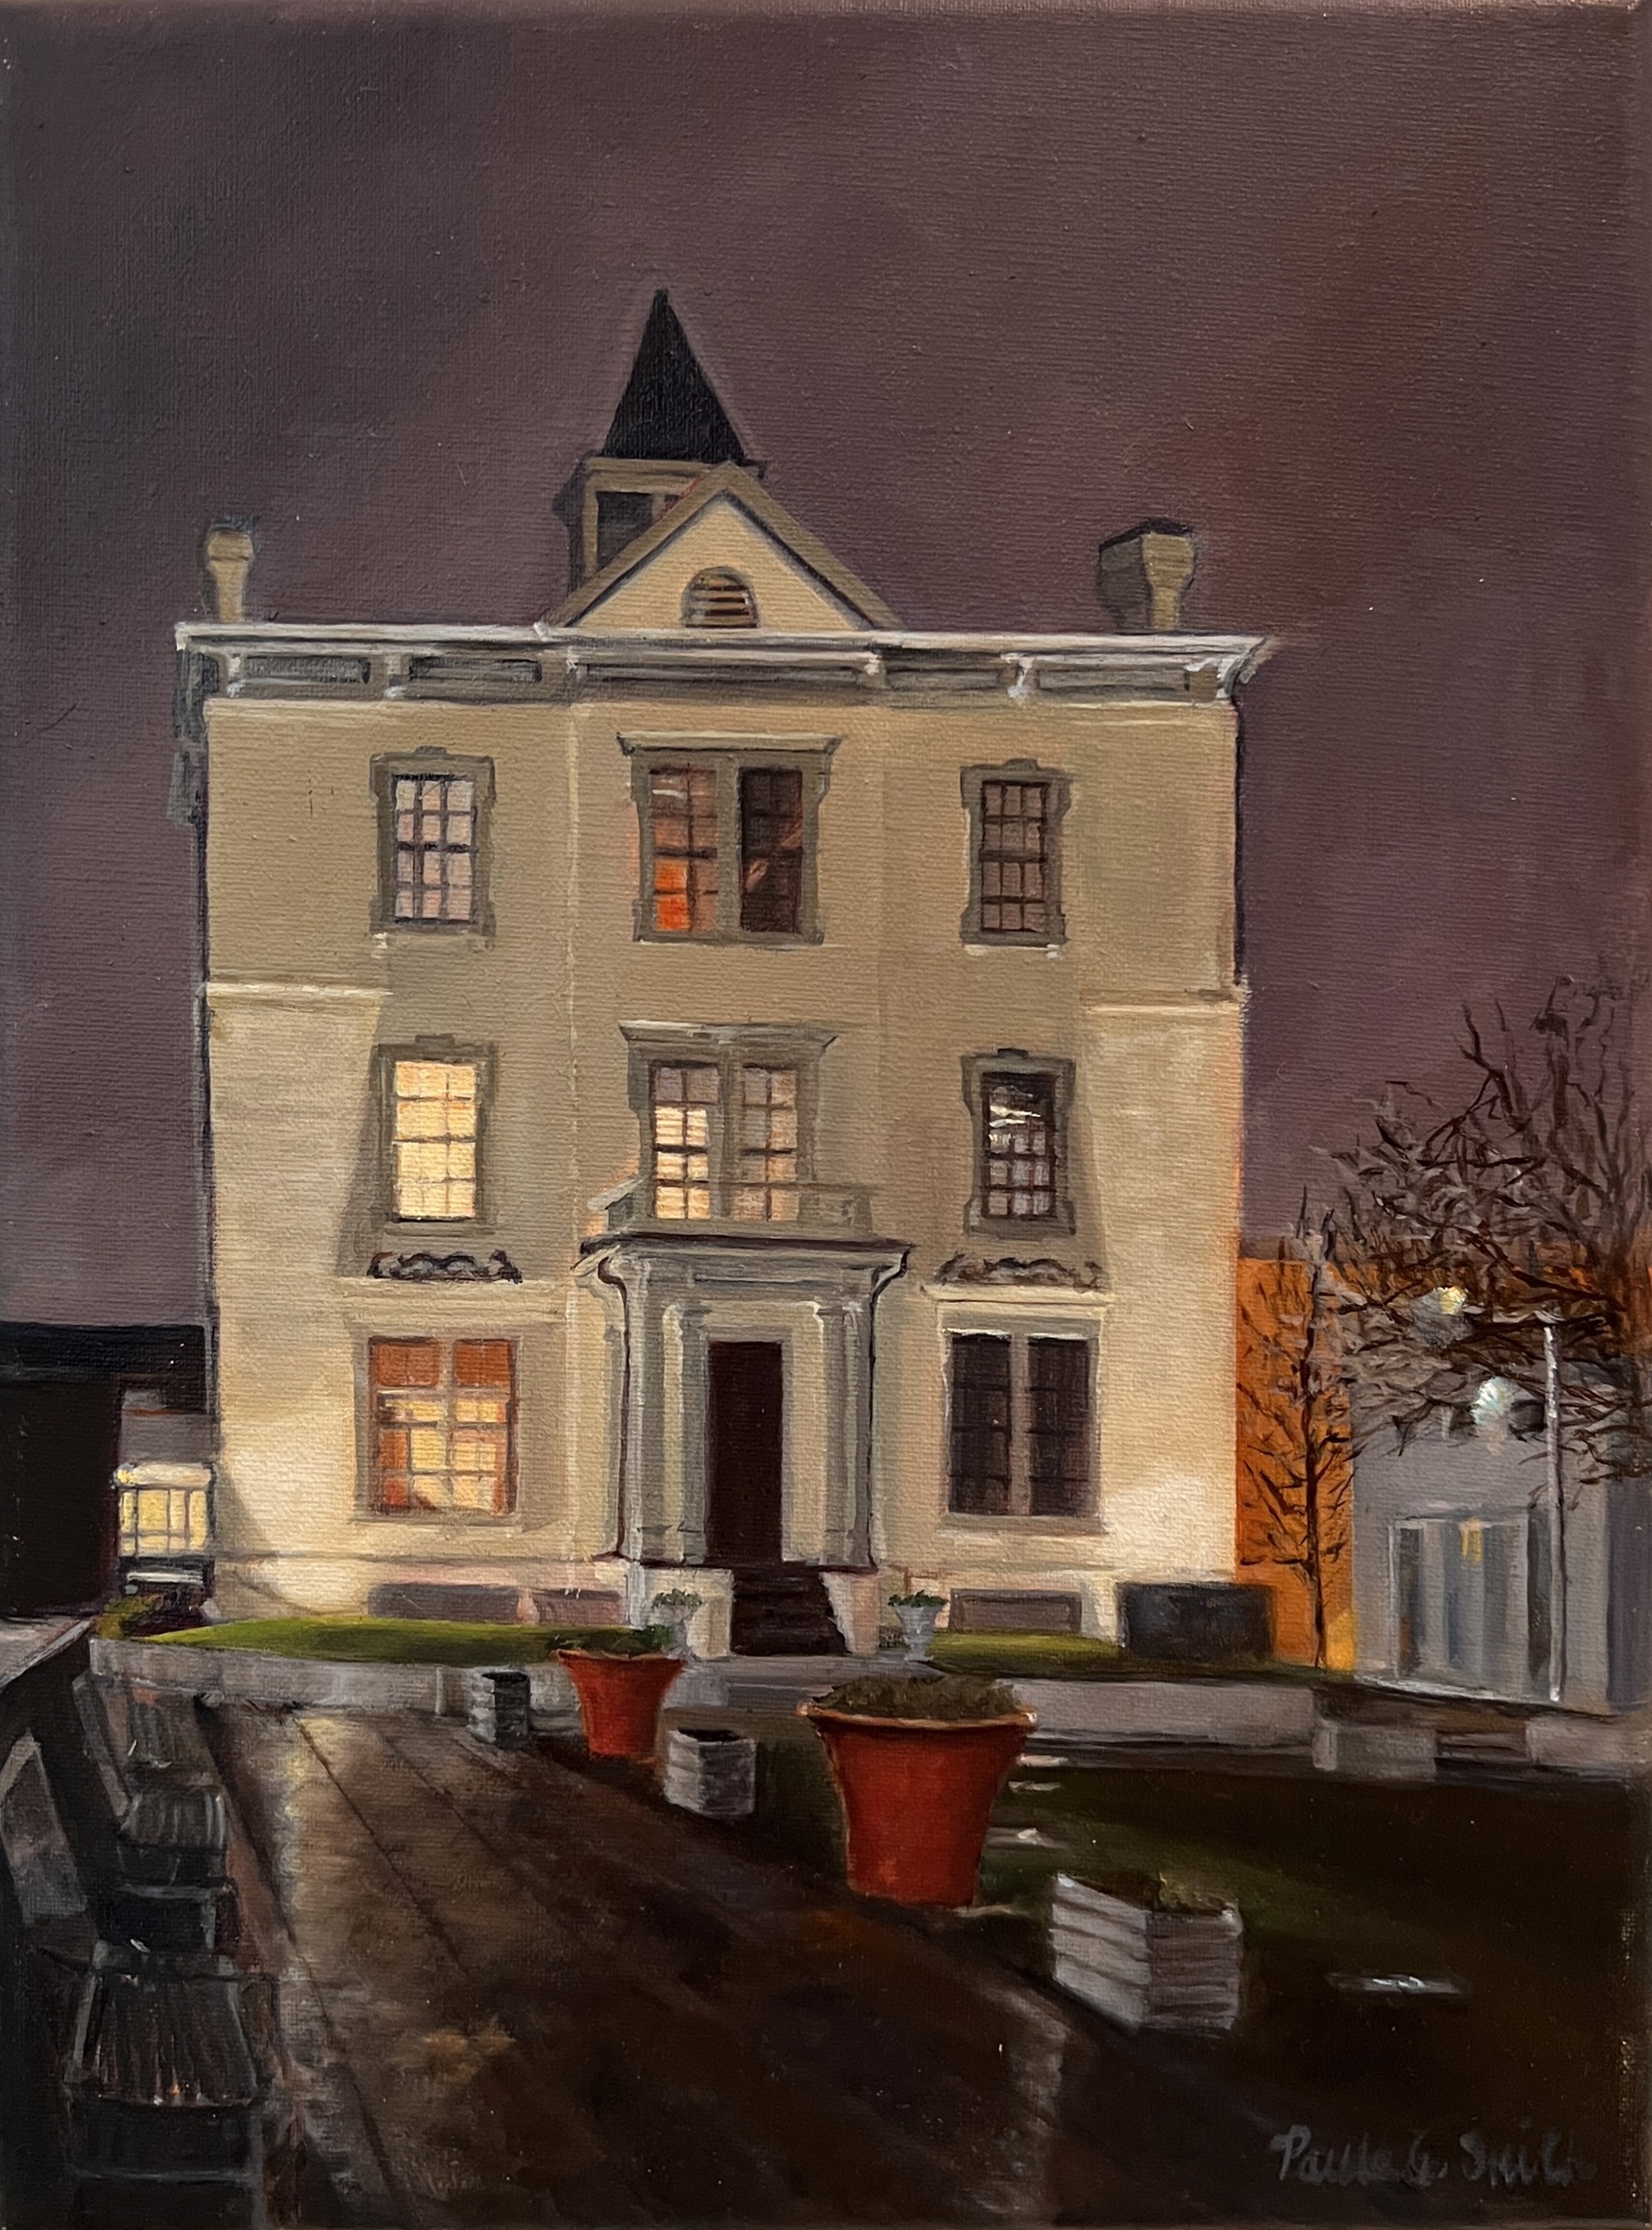 Drizzly Night at the Robinson House by Paula Smith